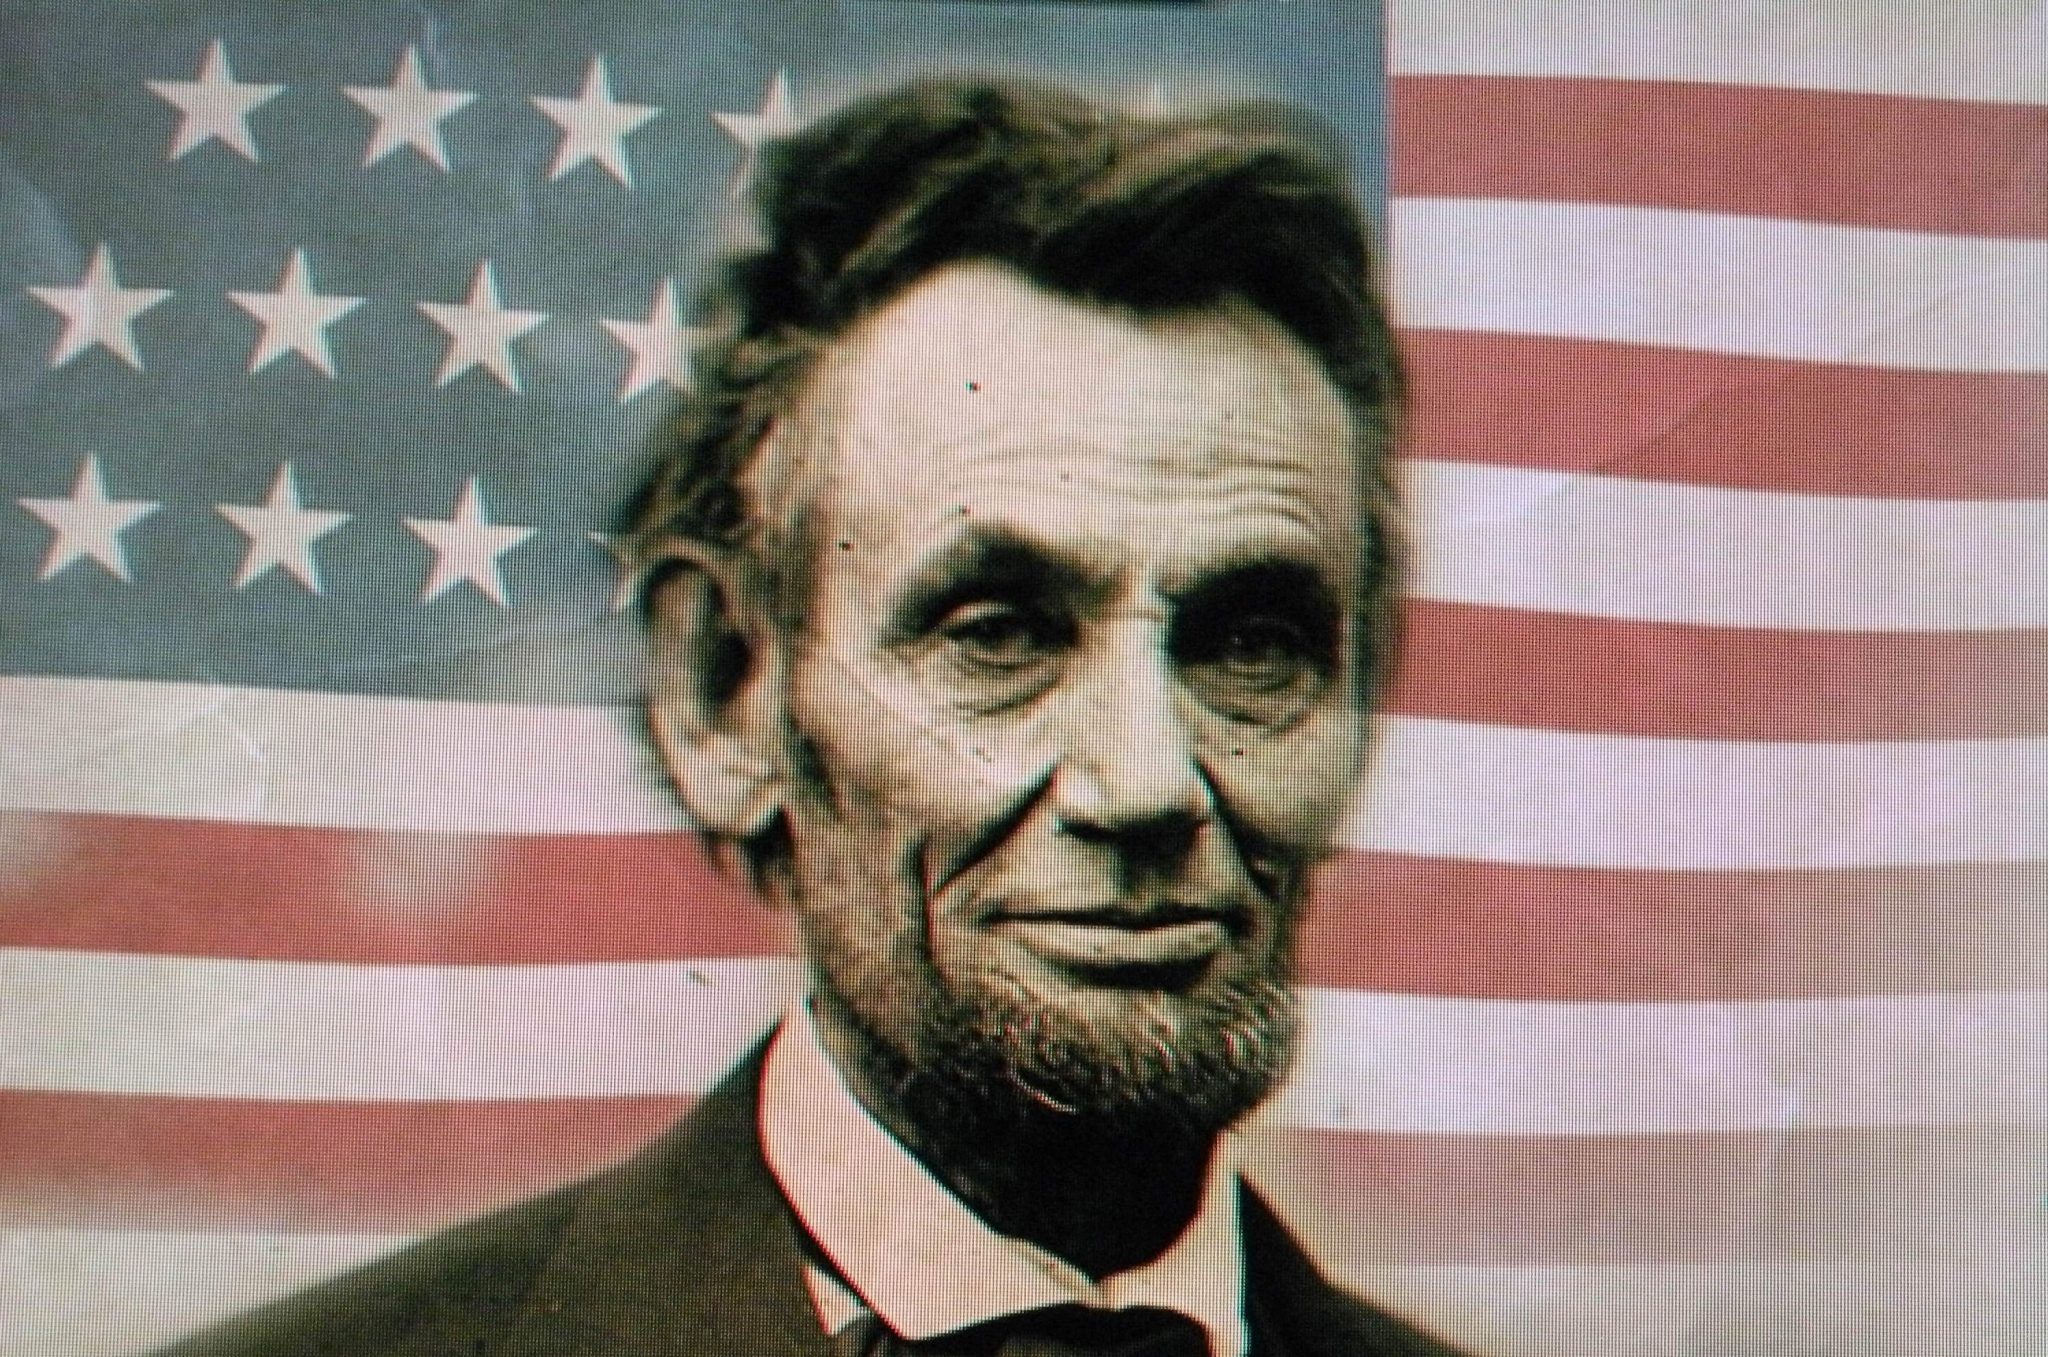 Abraham Lincoln Reconsidered - The Imaginative Conservative